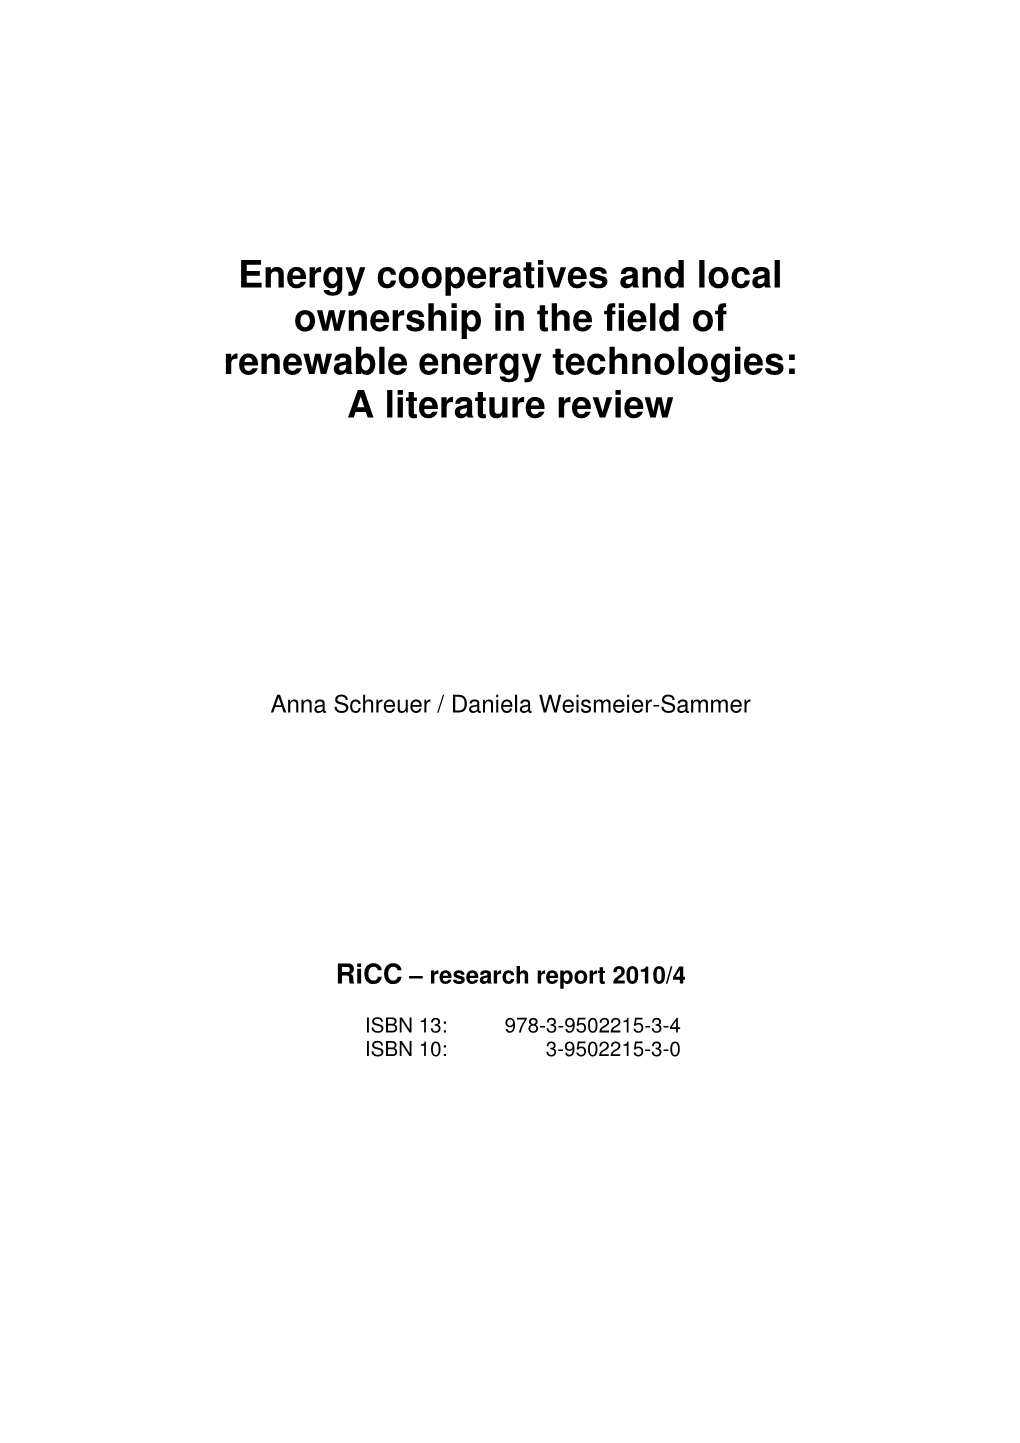 Energy Cooperatives and Local Ownership in the Field of Renewable Energy Technologies: a Literature Review